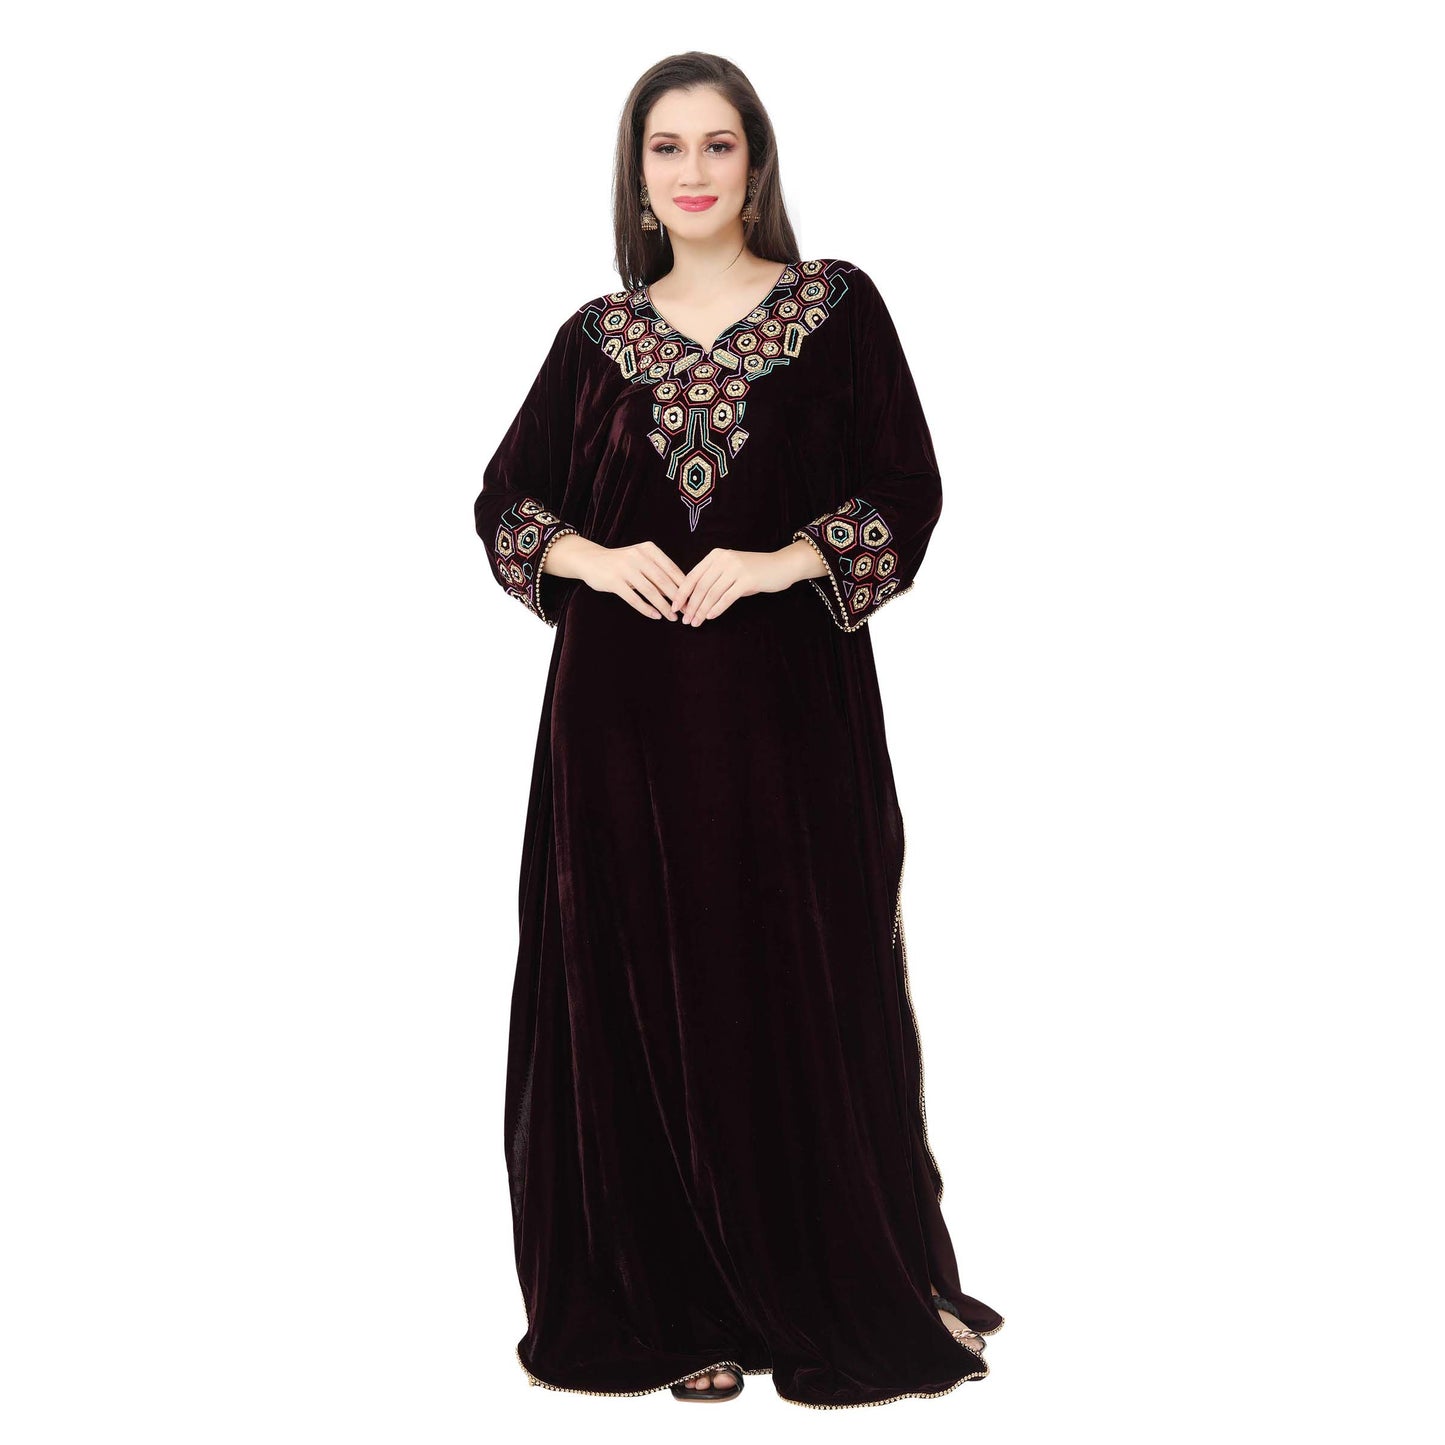 Arabic style trendy gowns for female Archives - StylesGap.com